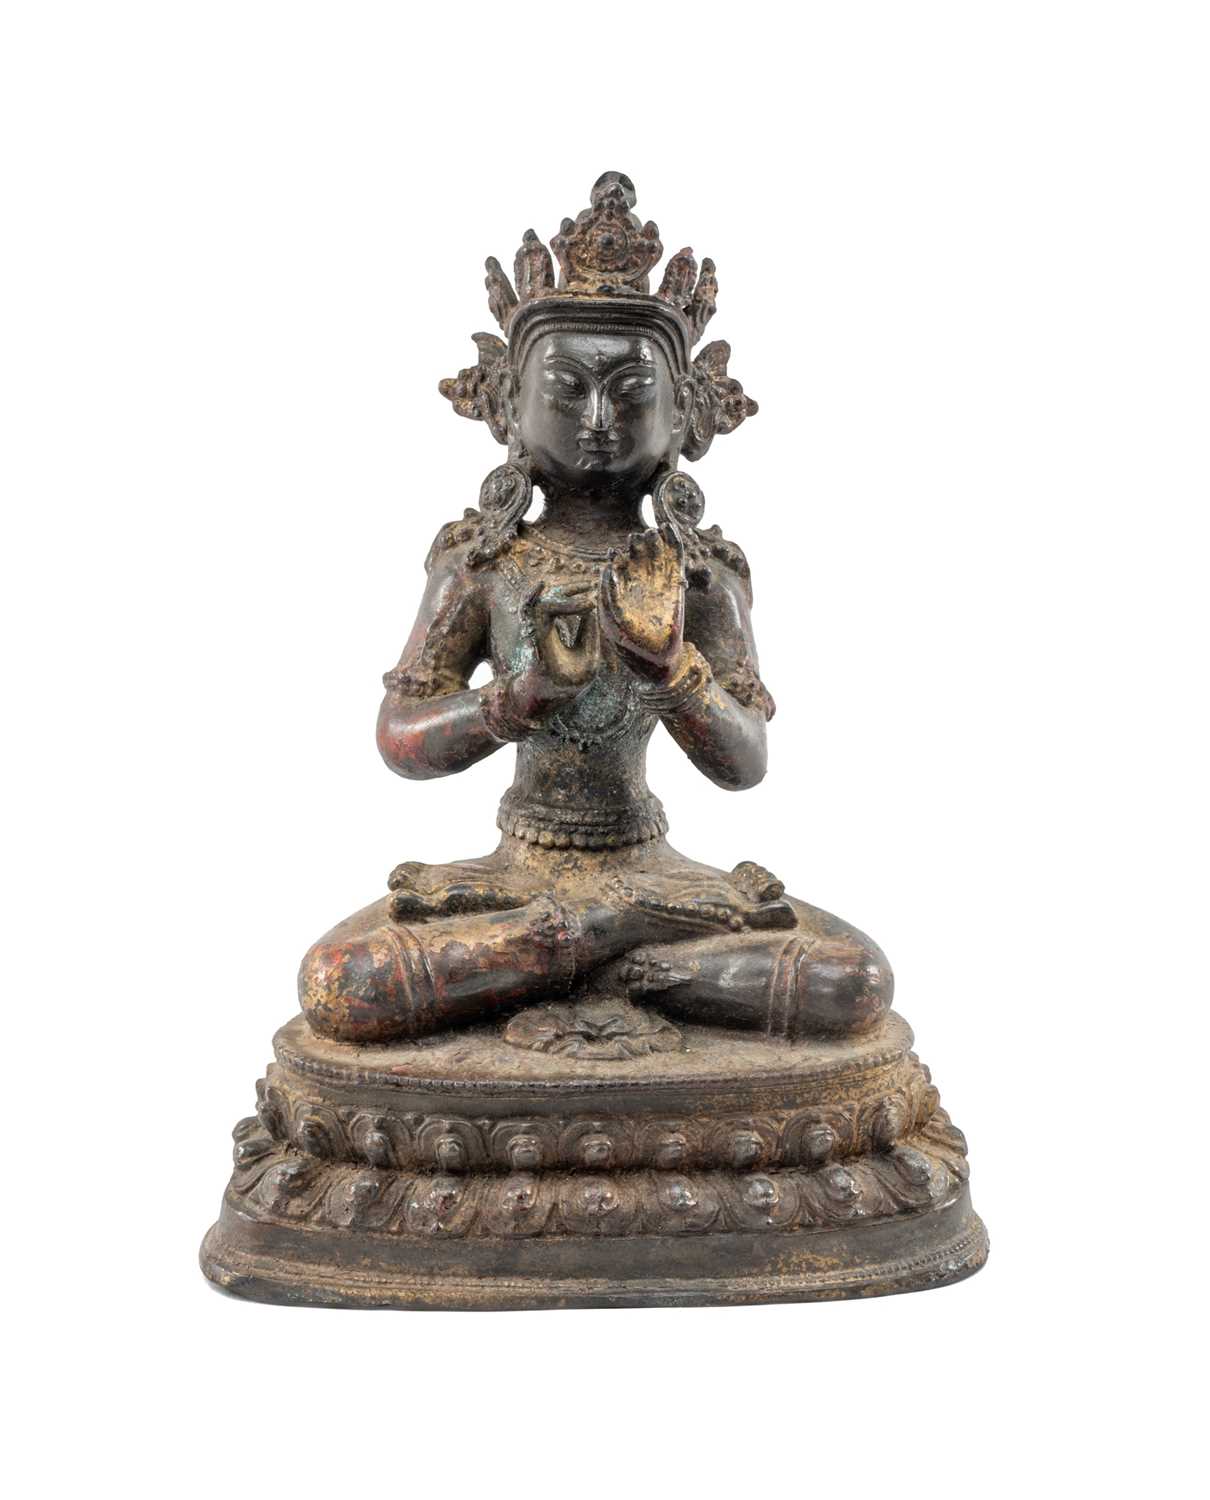 CHINESE BRONZE FIGURE OF GUANYIN, probably Late Ming Dynasty, seated in vajrasana on a double